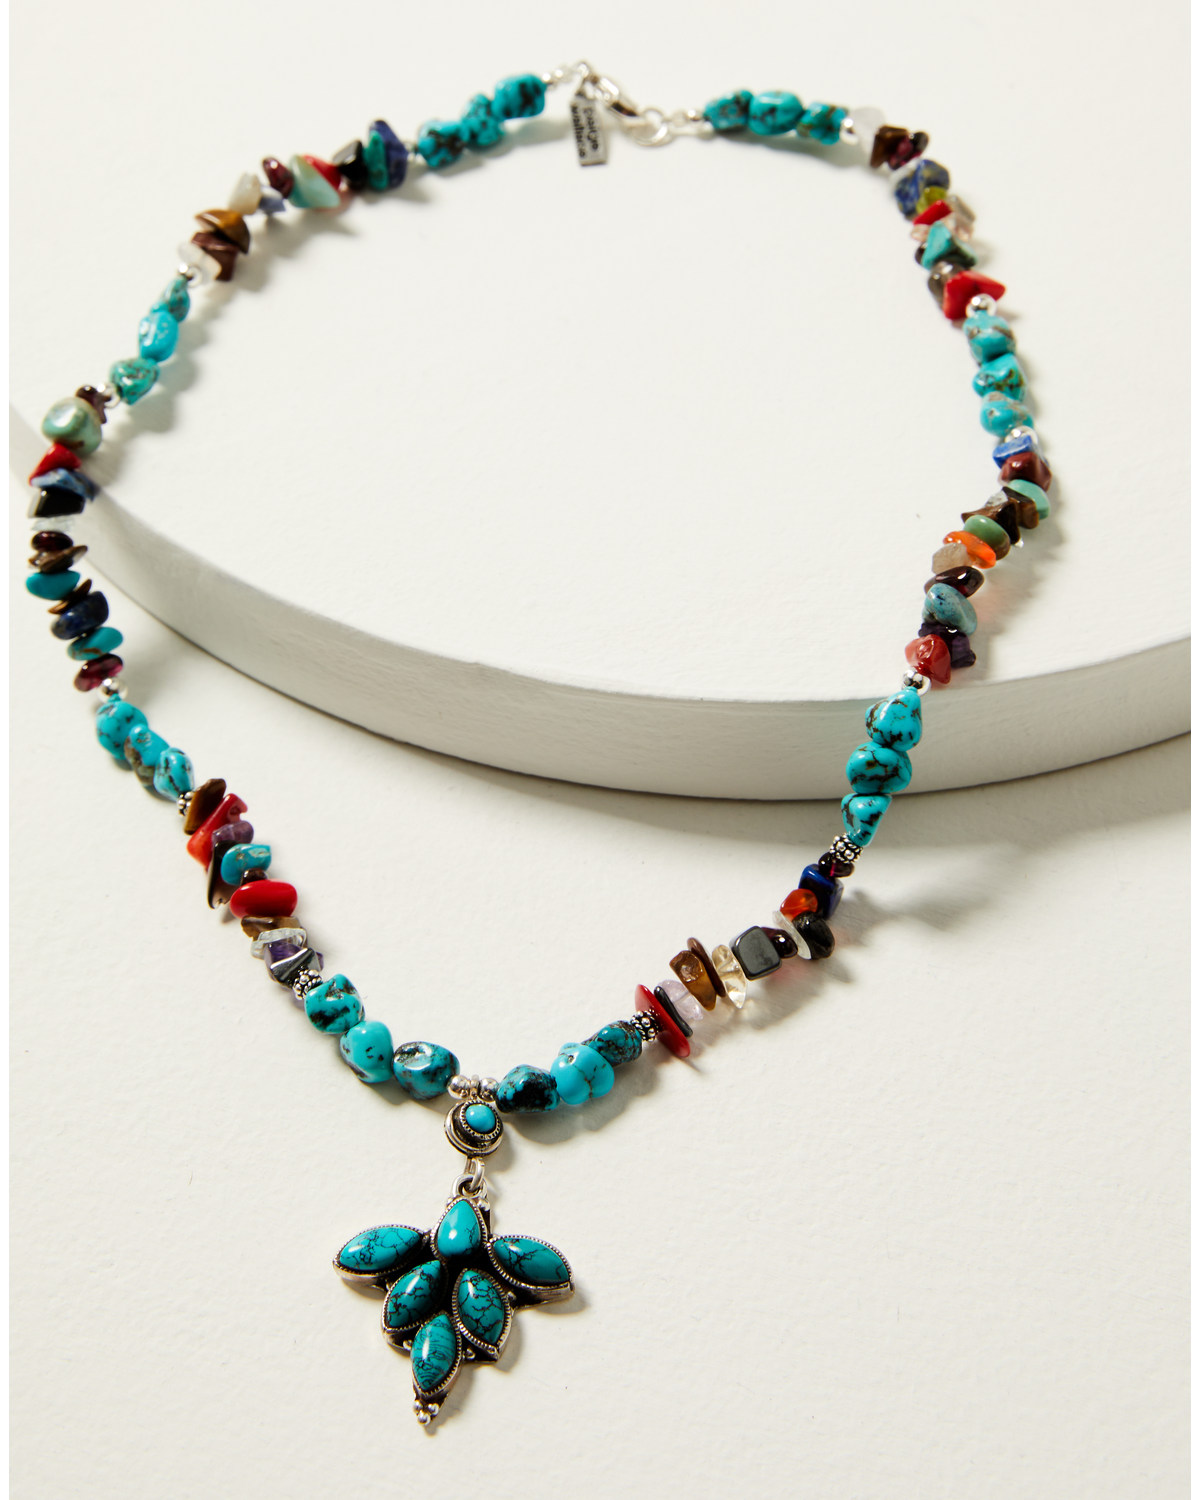 Paige Wallace Women's Multi Stone Turquoise Necklace